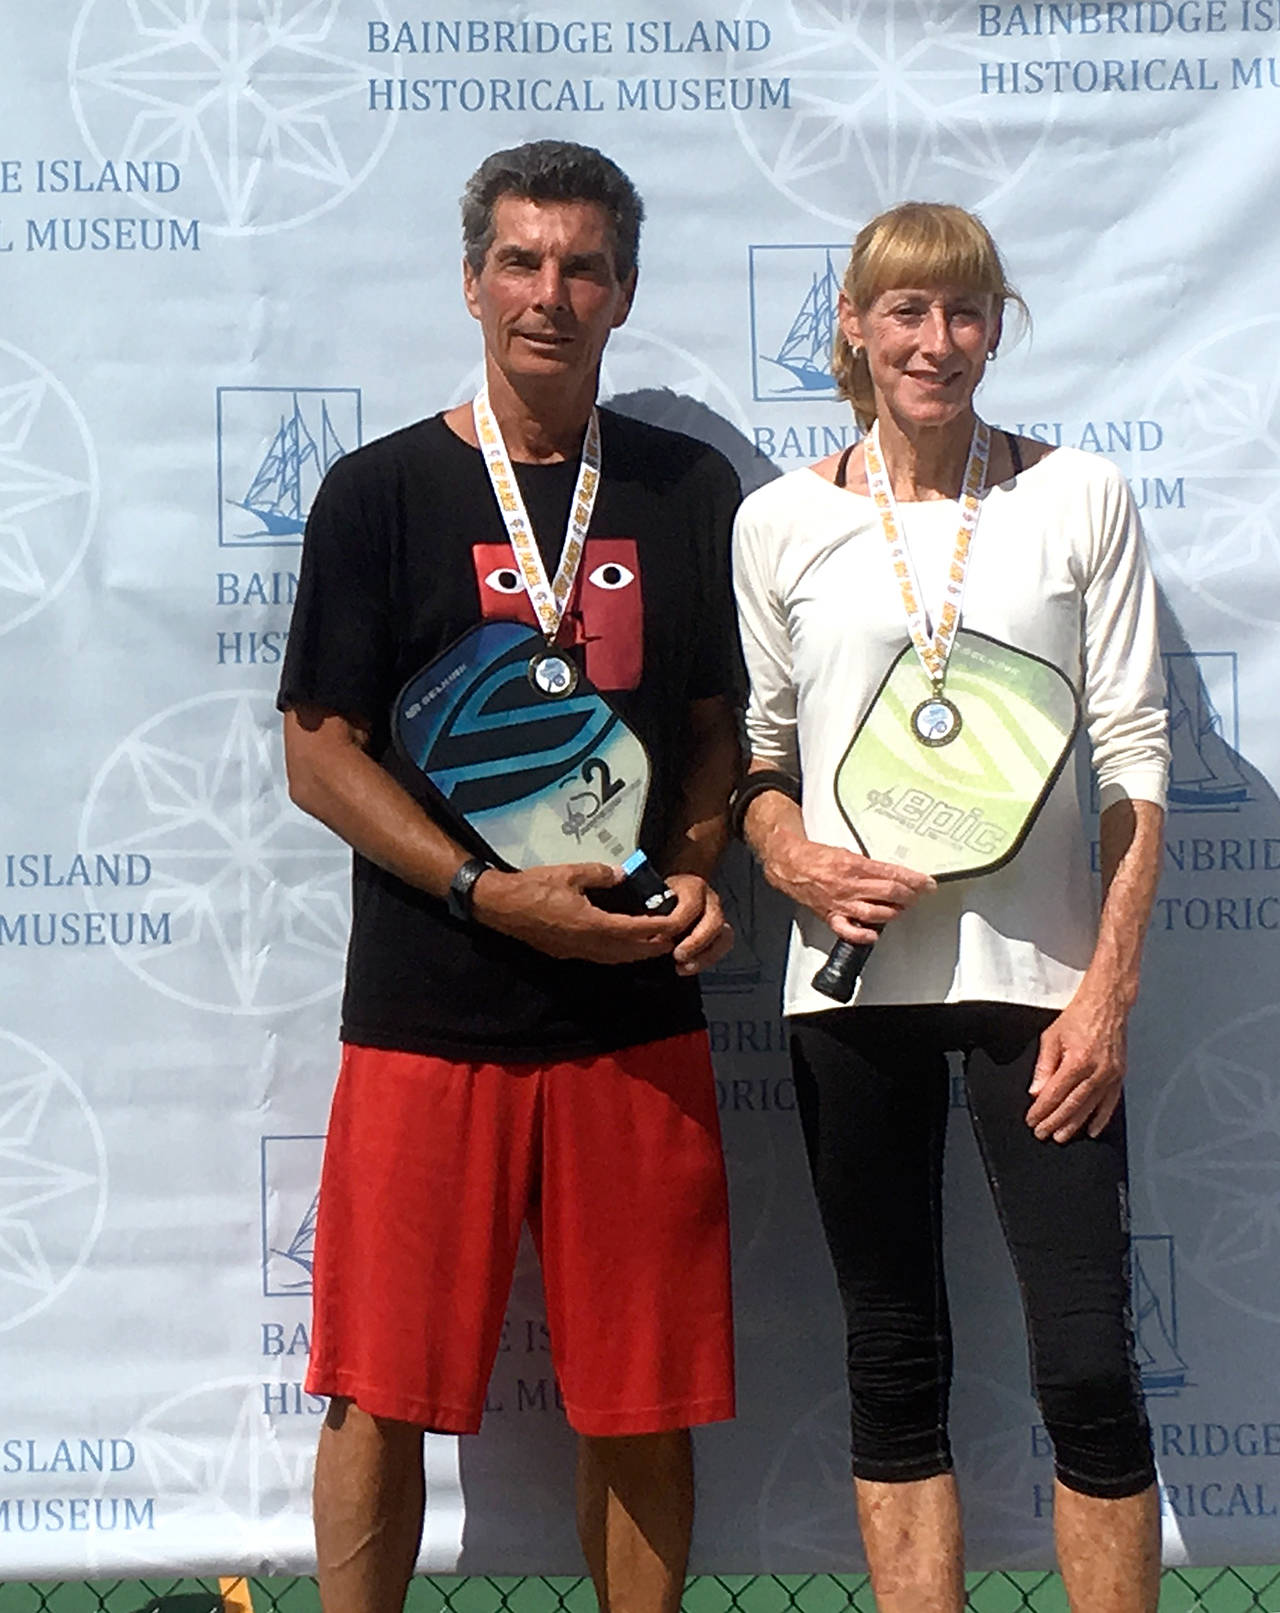 Port Angeles pickleball players Richard Reed, left, and Colleen Alger teamed to win the Age 50-plus Mixed Doubles 3.5 skill level title at the Bainbridge Island FoundersTournament.